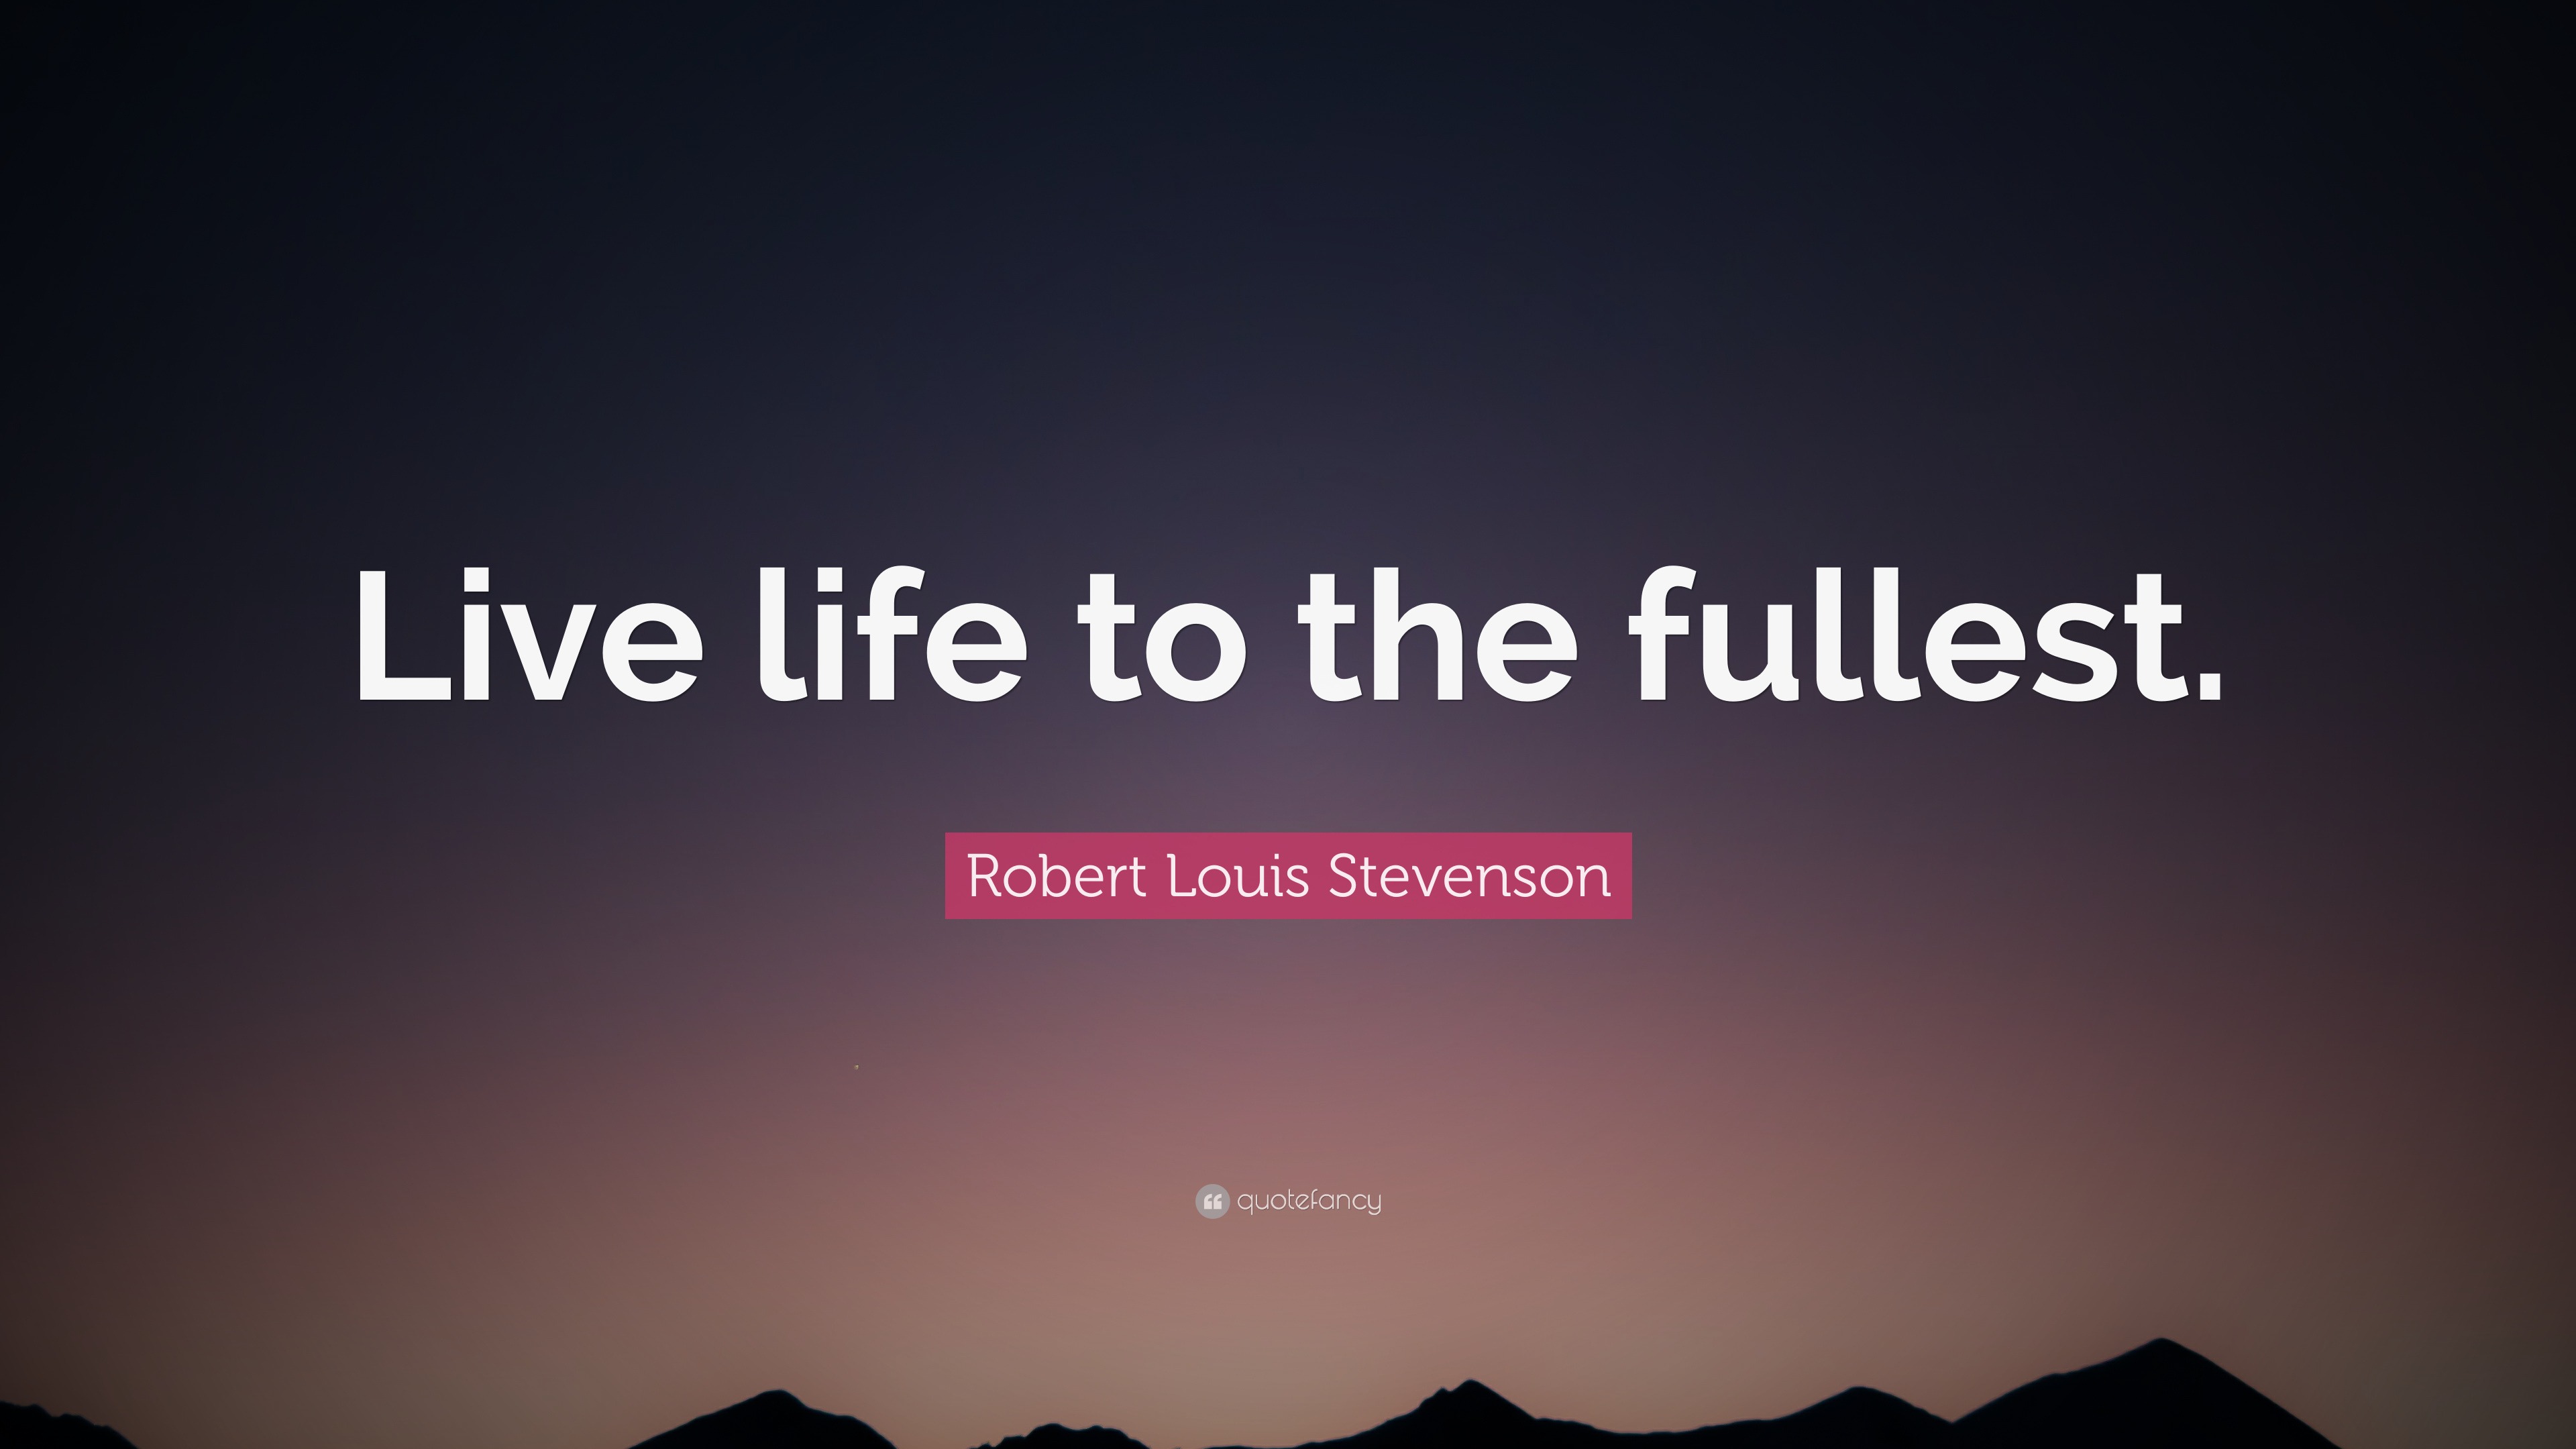 Robert Louis Stevenson Quote: “Live life to the fullest.” (7 wallpapers) - Quotefancy